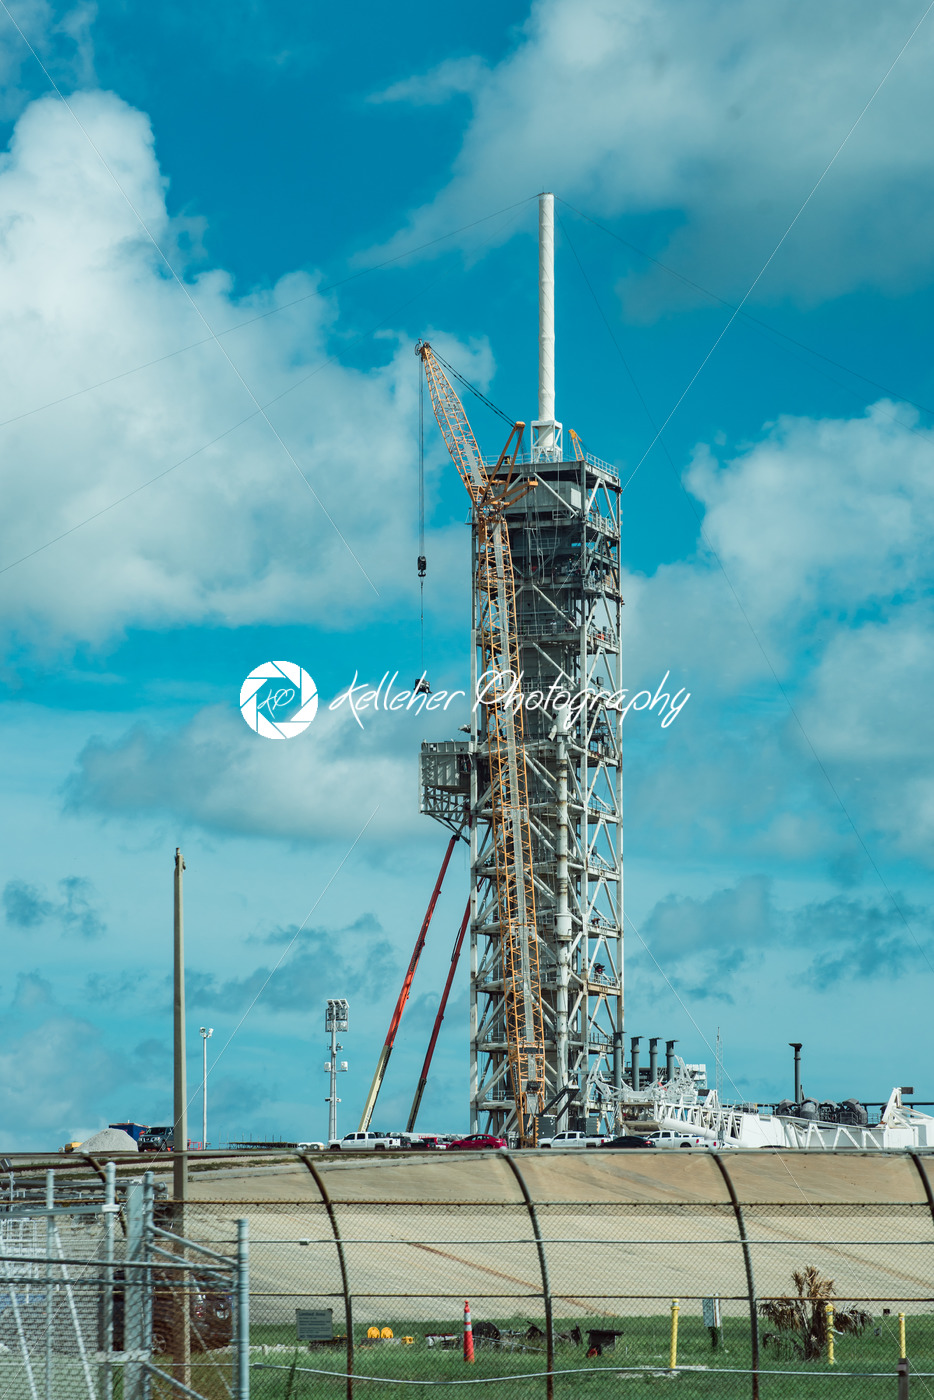 Cape Canaveral, Florida – August 13, 2018: Rocket Launch Pad at NASA Kennedy Space Center - Kelleher Photography Store